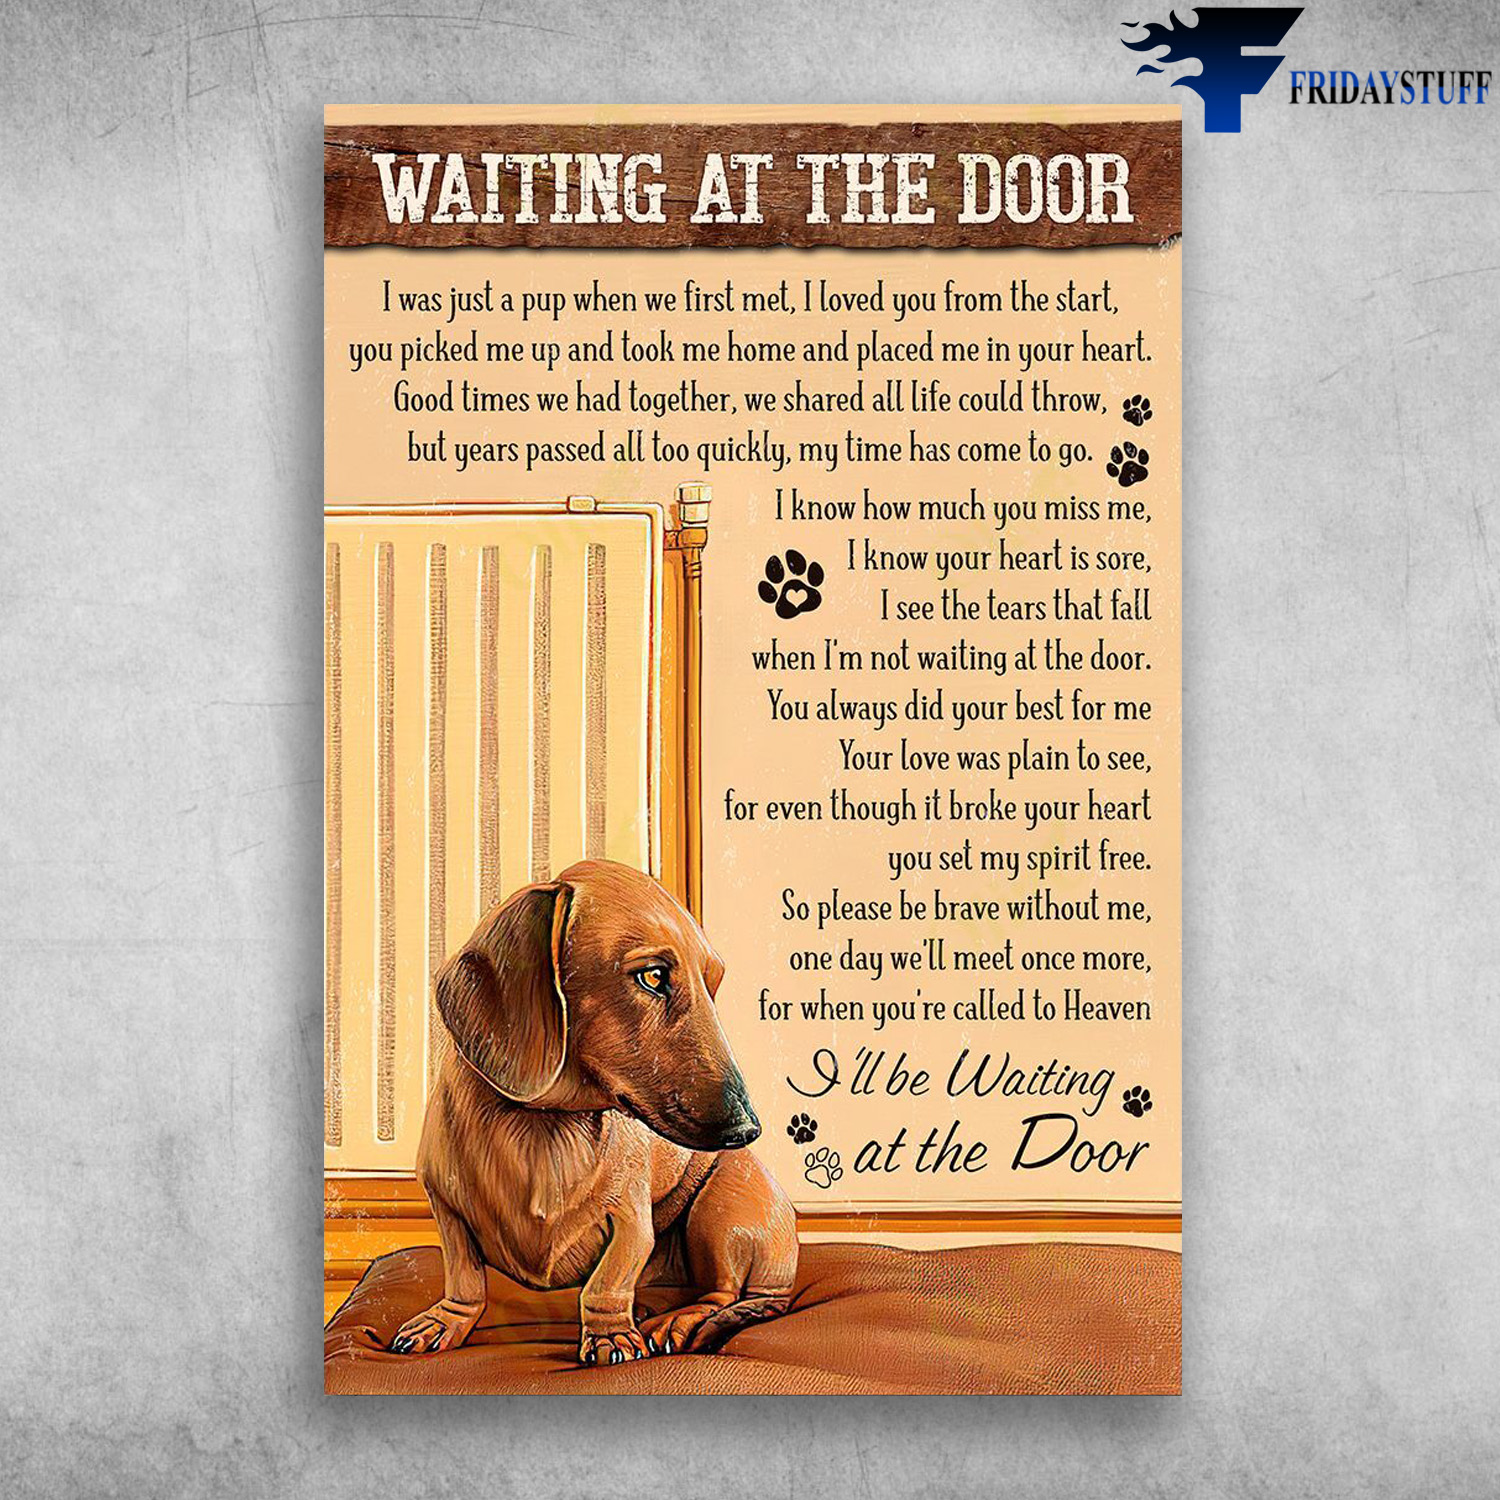 Dachshund Dog - Waiting At The Door, I Was Just A Cup When We First Meet, I Loved You From The Start, You Picked Me Up And Took Me Home, And Placed Me In Your Heart, Good Times We Had Together, We Shared All Life Could Throw